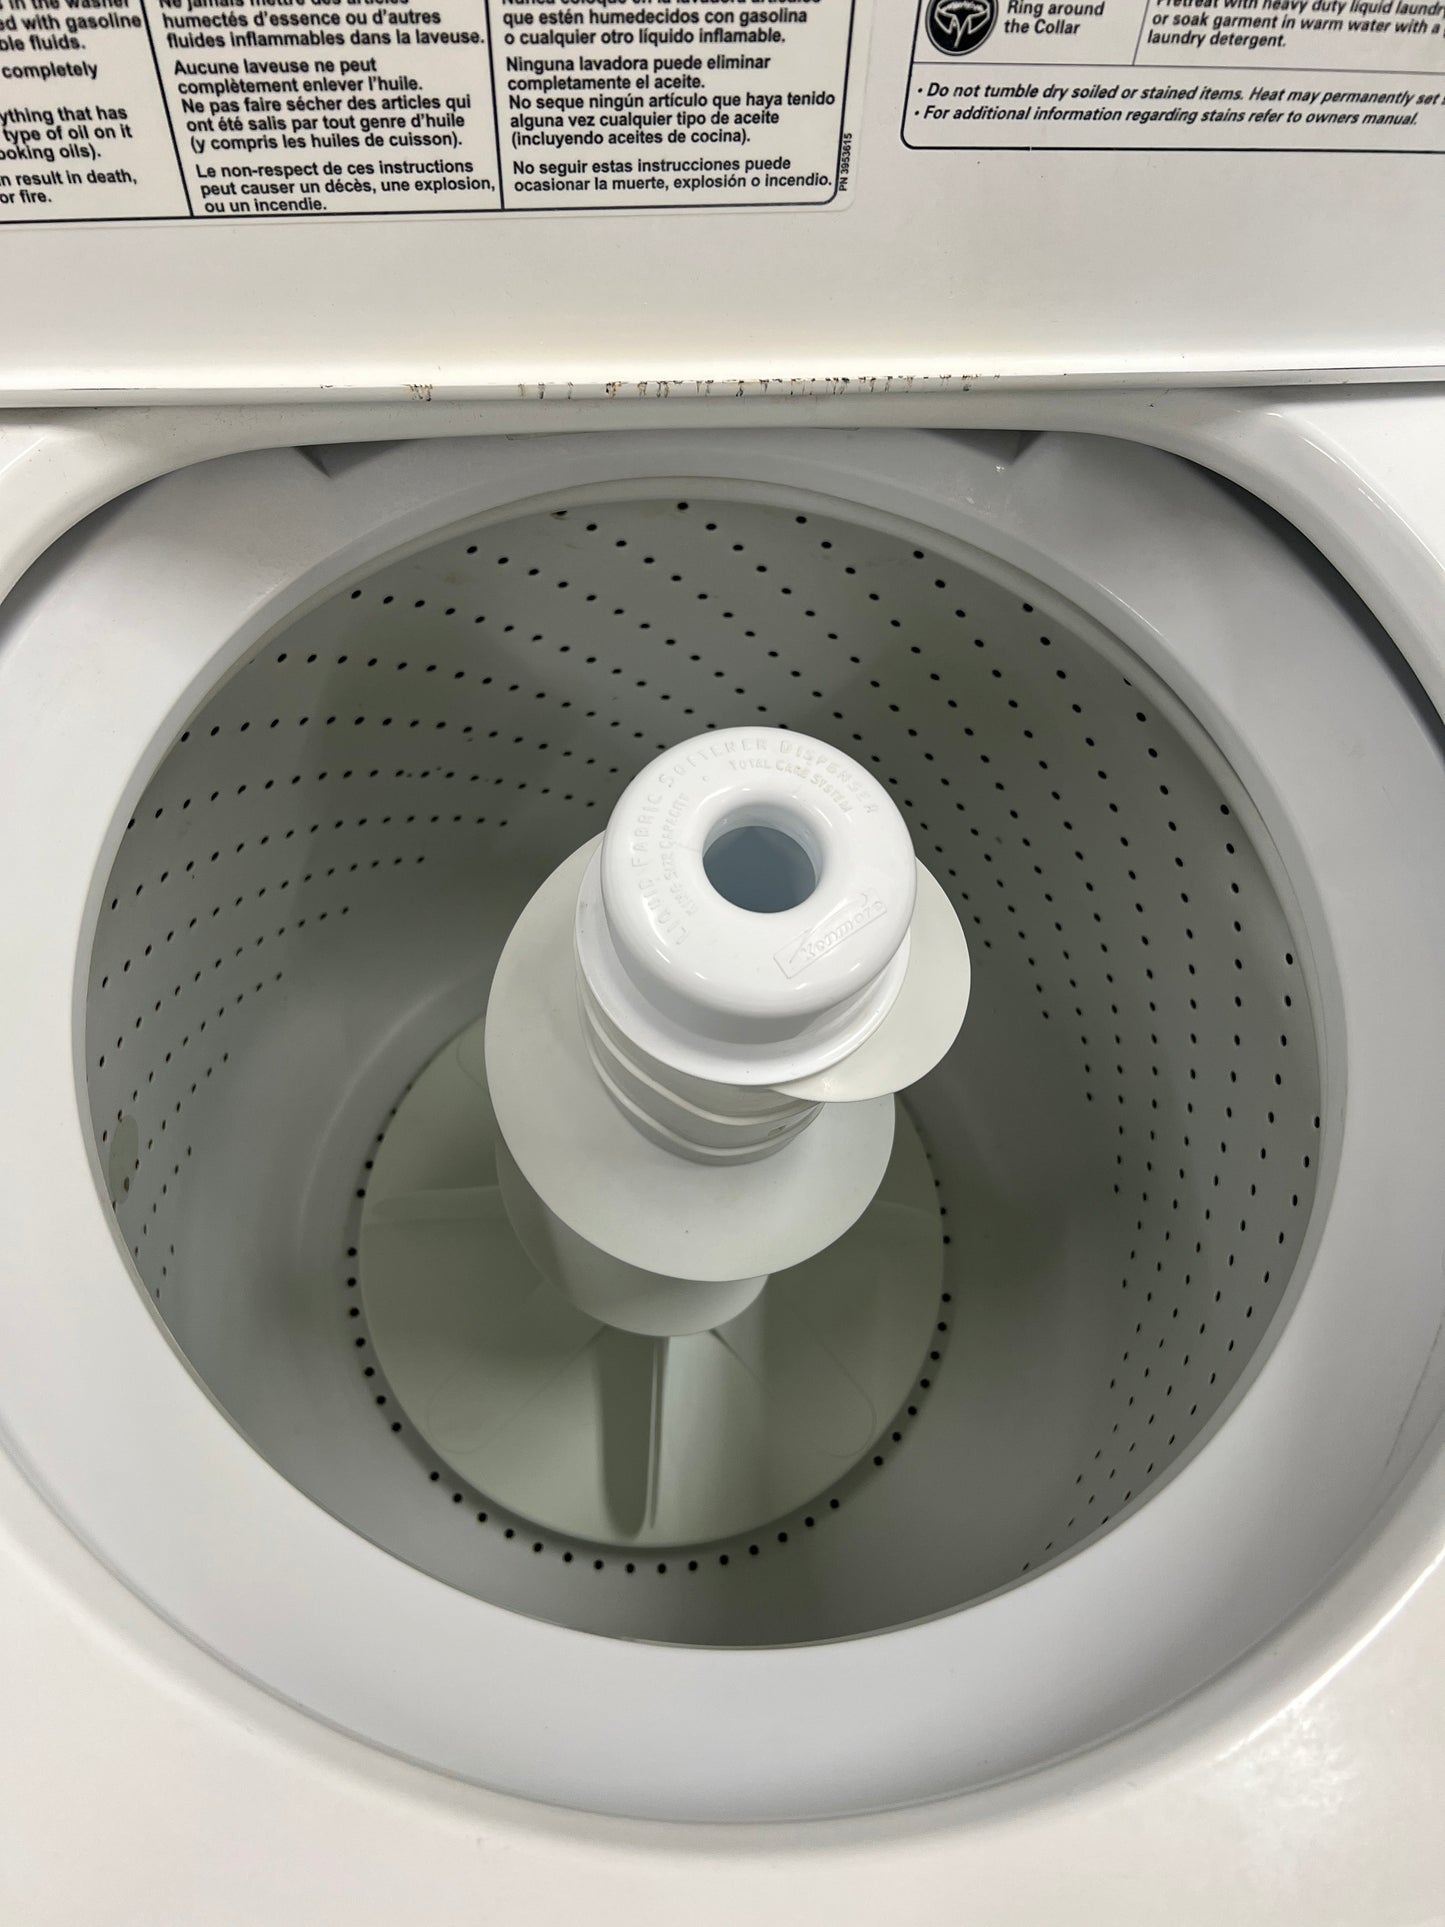 Kenmore 500 Top Load Washer In White, Ready For Pick Up/Delivery, 999687